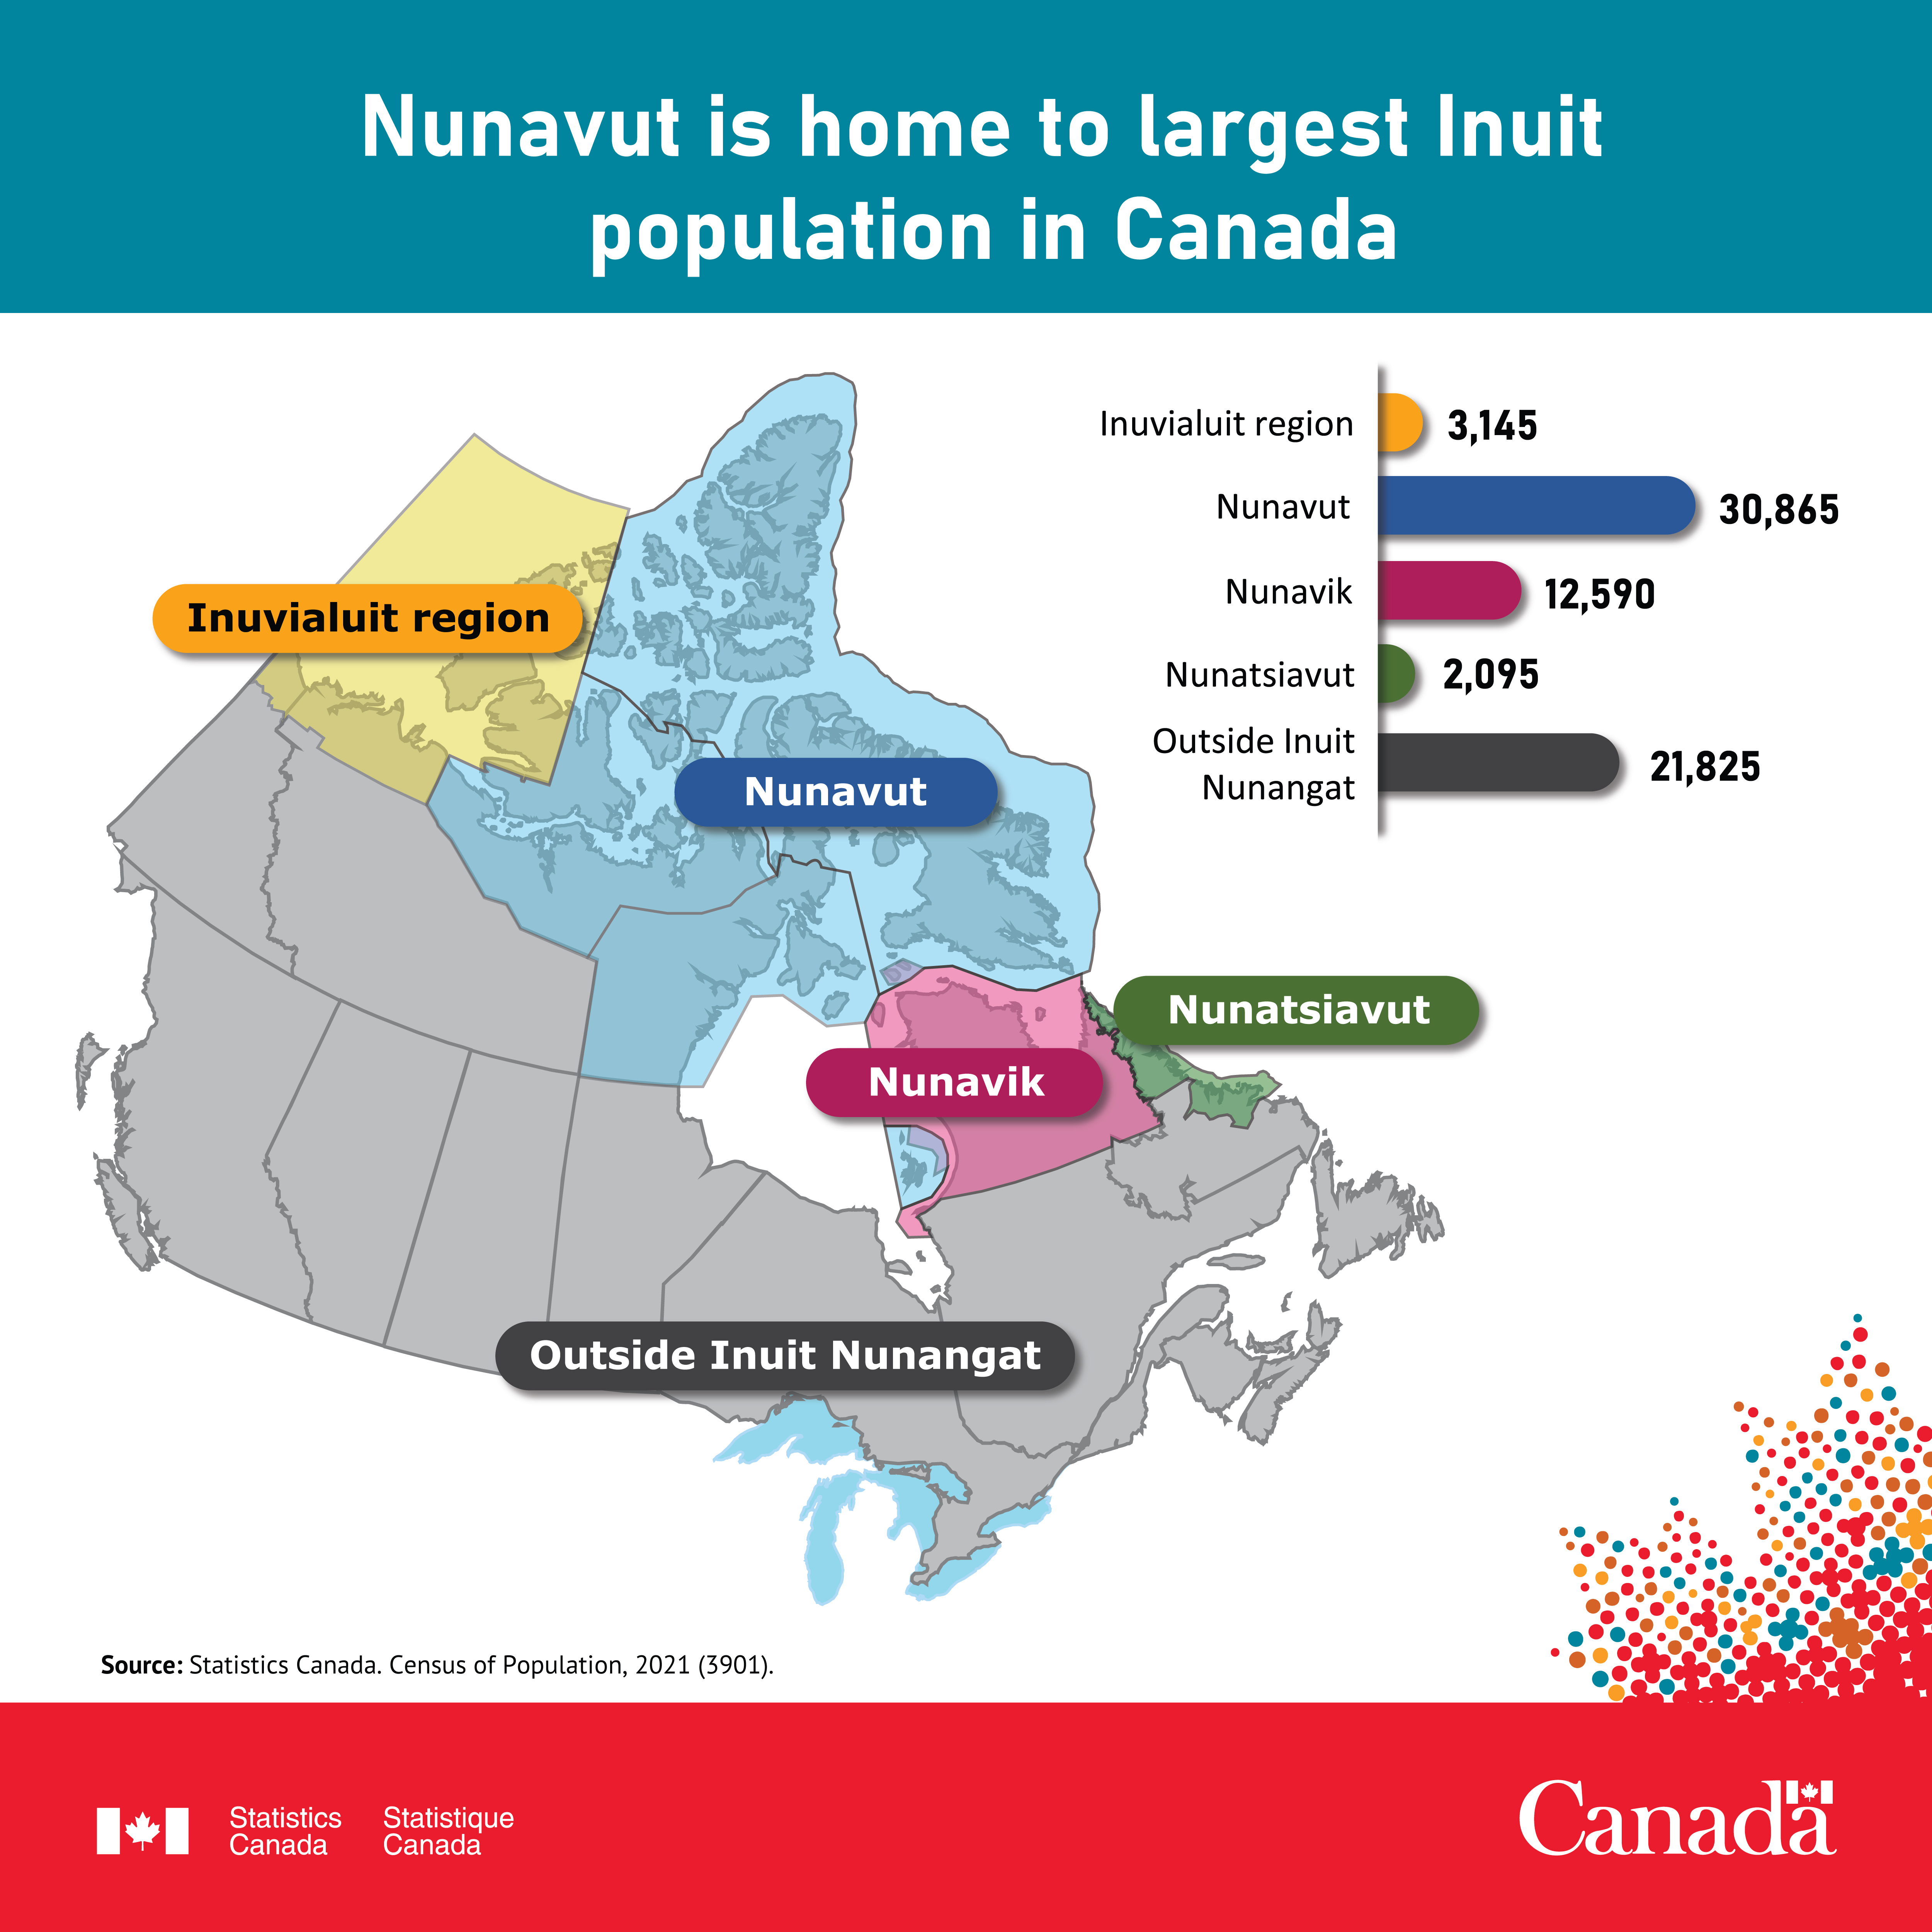 Post 4 image - Nunavut is home to the largest Inuit population in Canada